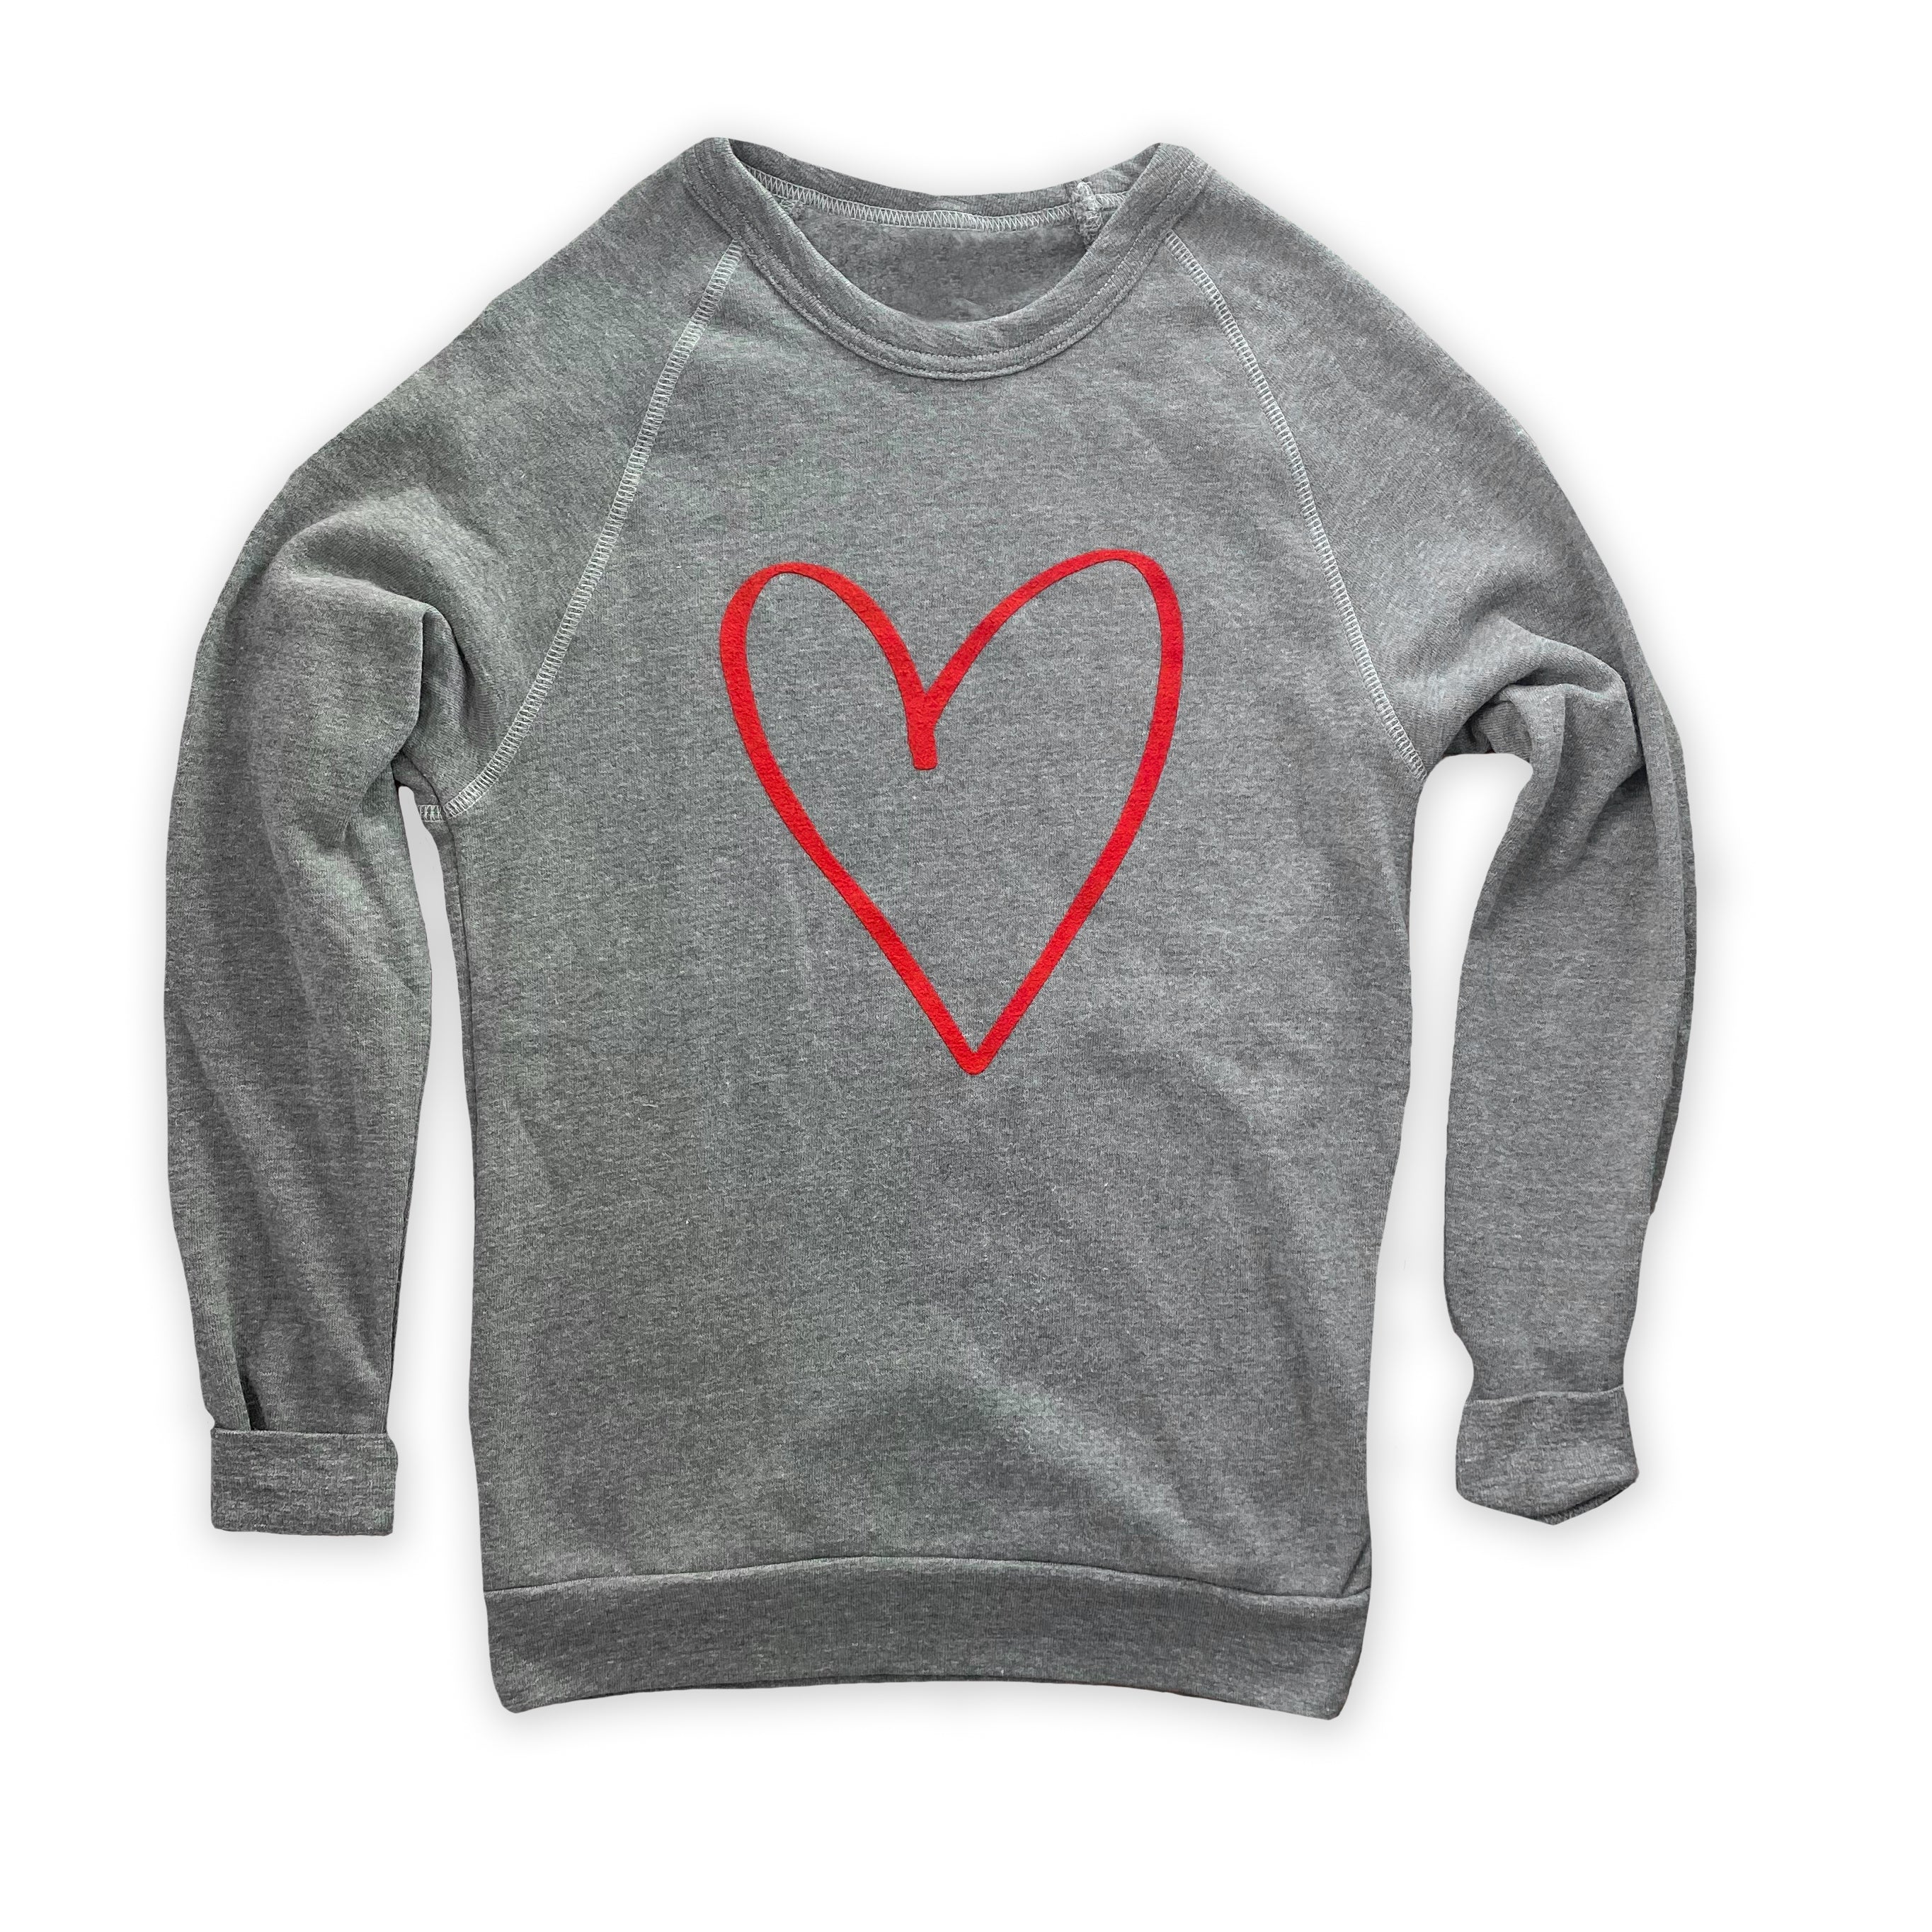 ON SALE - Show Some Love Heart sweatshirt (Discount shown in cart) – Taylor  Wolfe